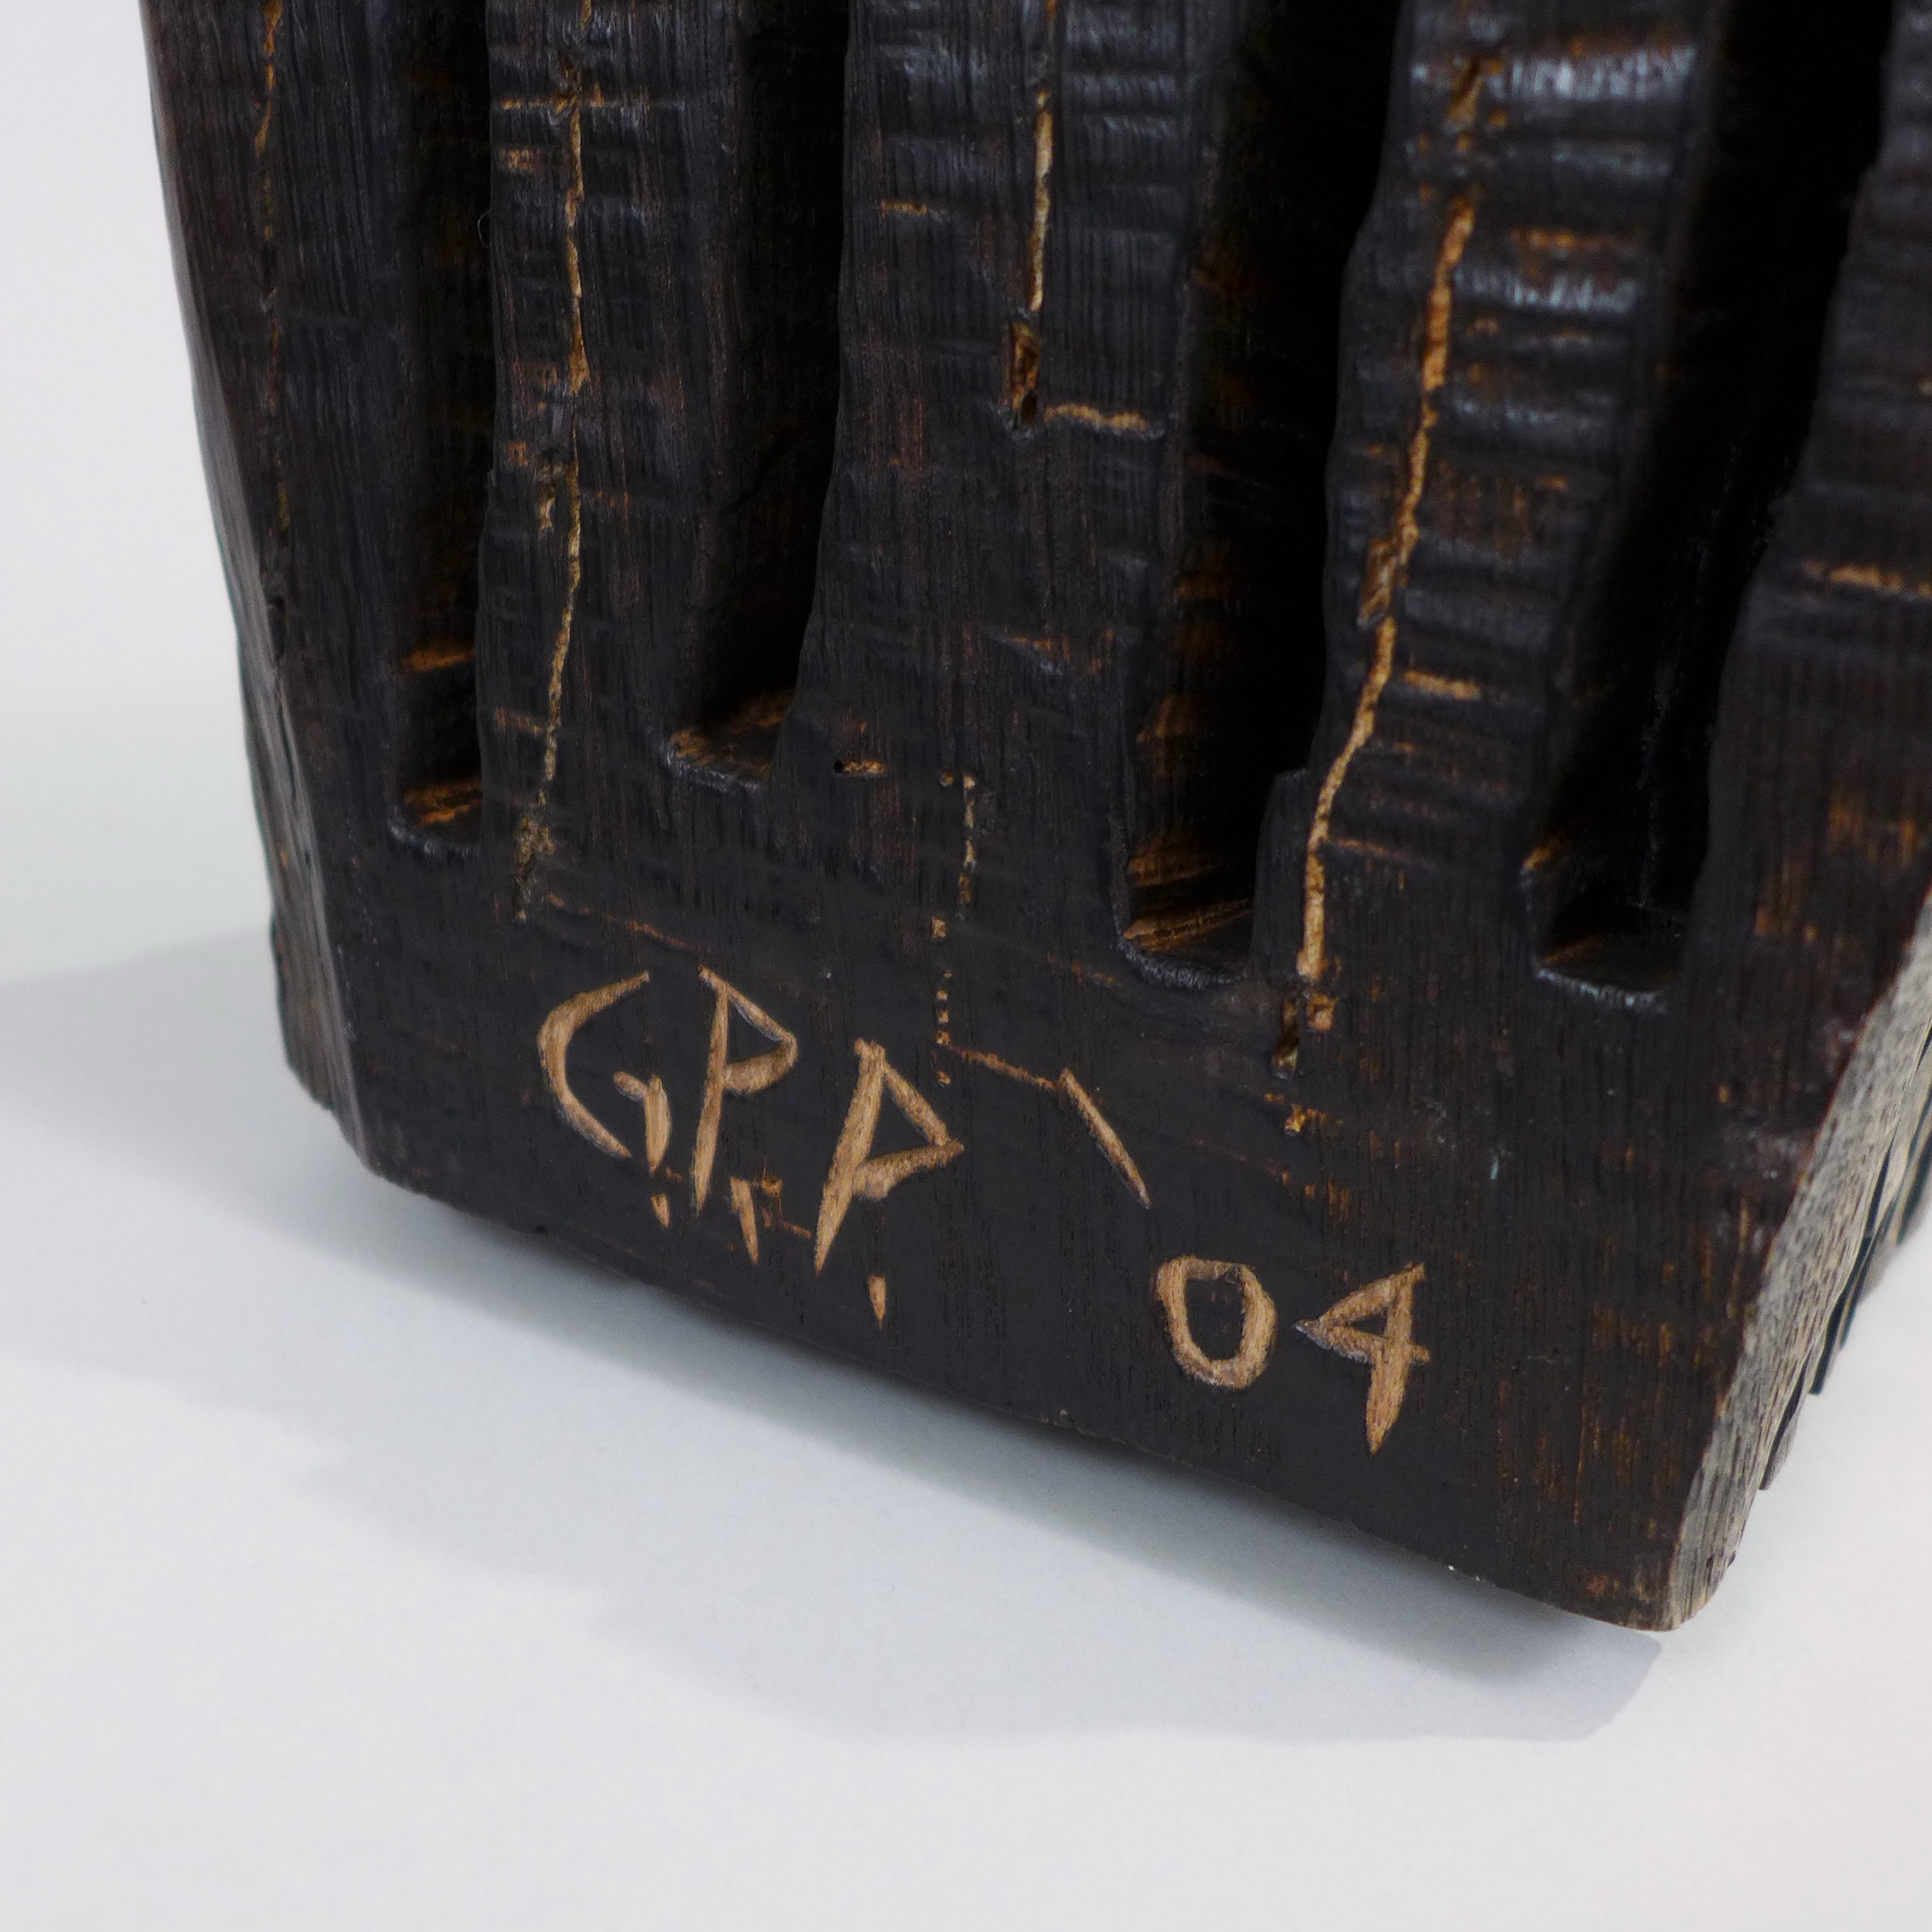 Dramatic wood sculptures by George Peterson at the Center for Art in Wood